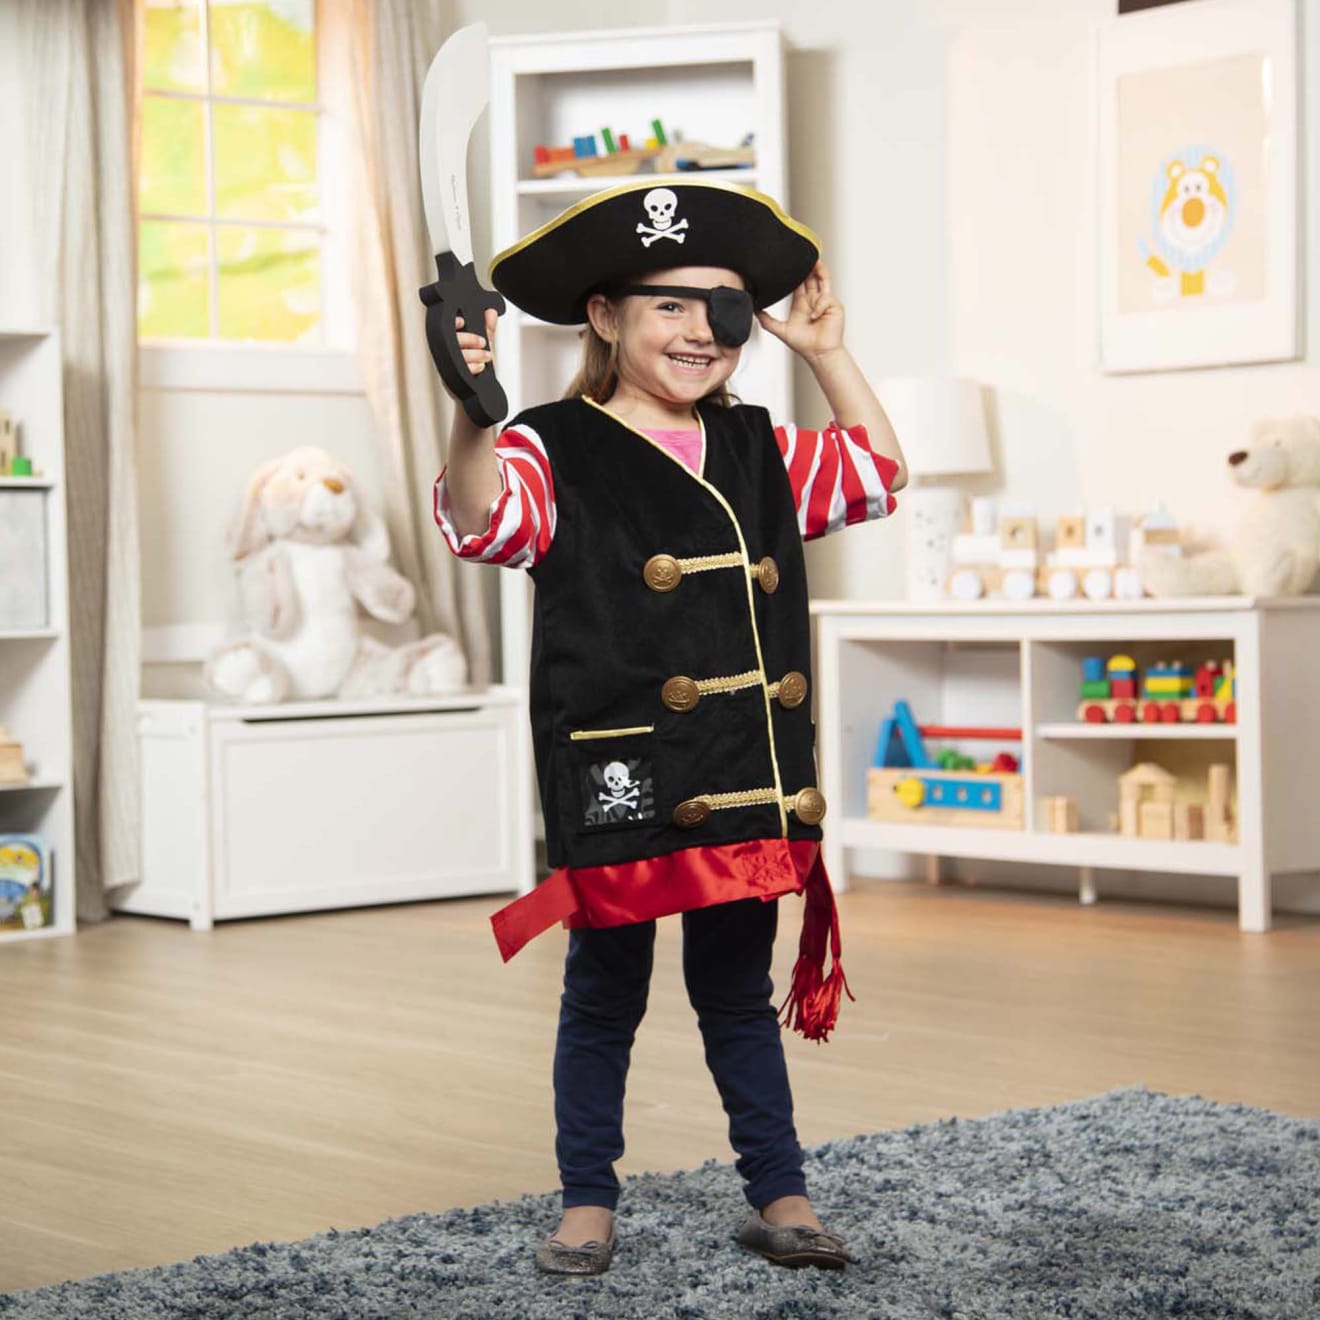 Child Boys Medieval Royal Prince/Pirate Costume Outfits Role Play Dress Up  Sets | eBay